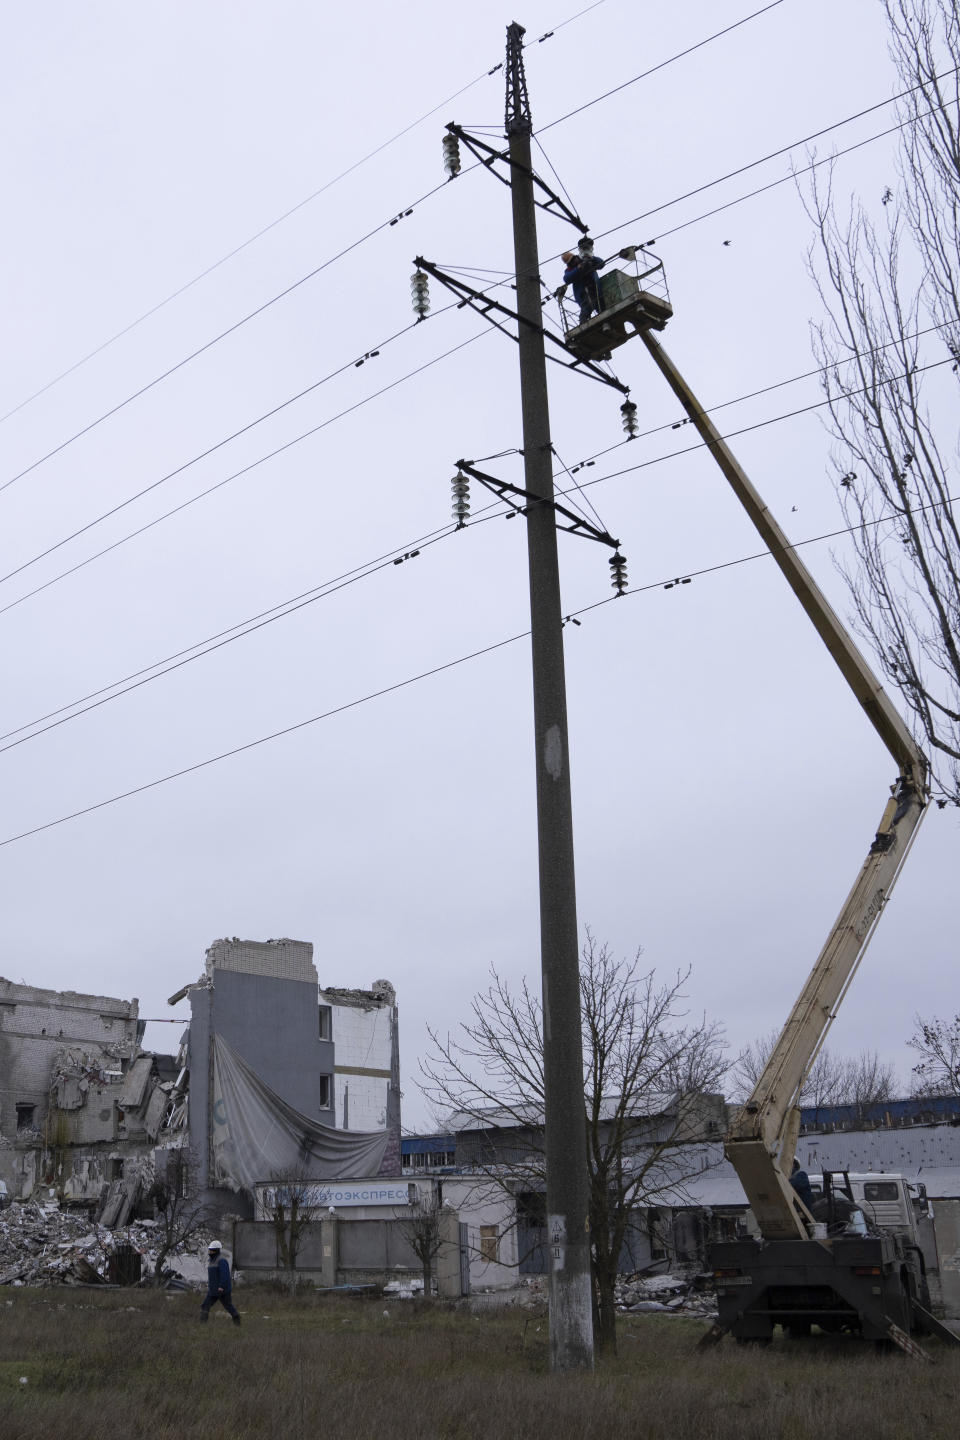 Workers repair electricity cables damaged during shelling by Russian forces in Kherson, Ukraine, Saturday, Dec. 3, 2022. (AP Photo/Evgeniy Maloletka)